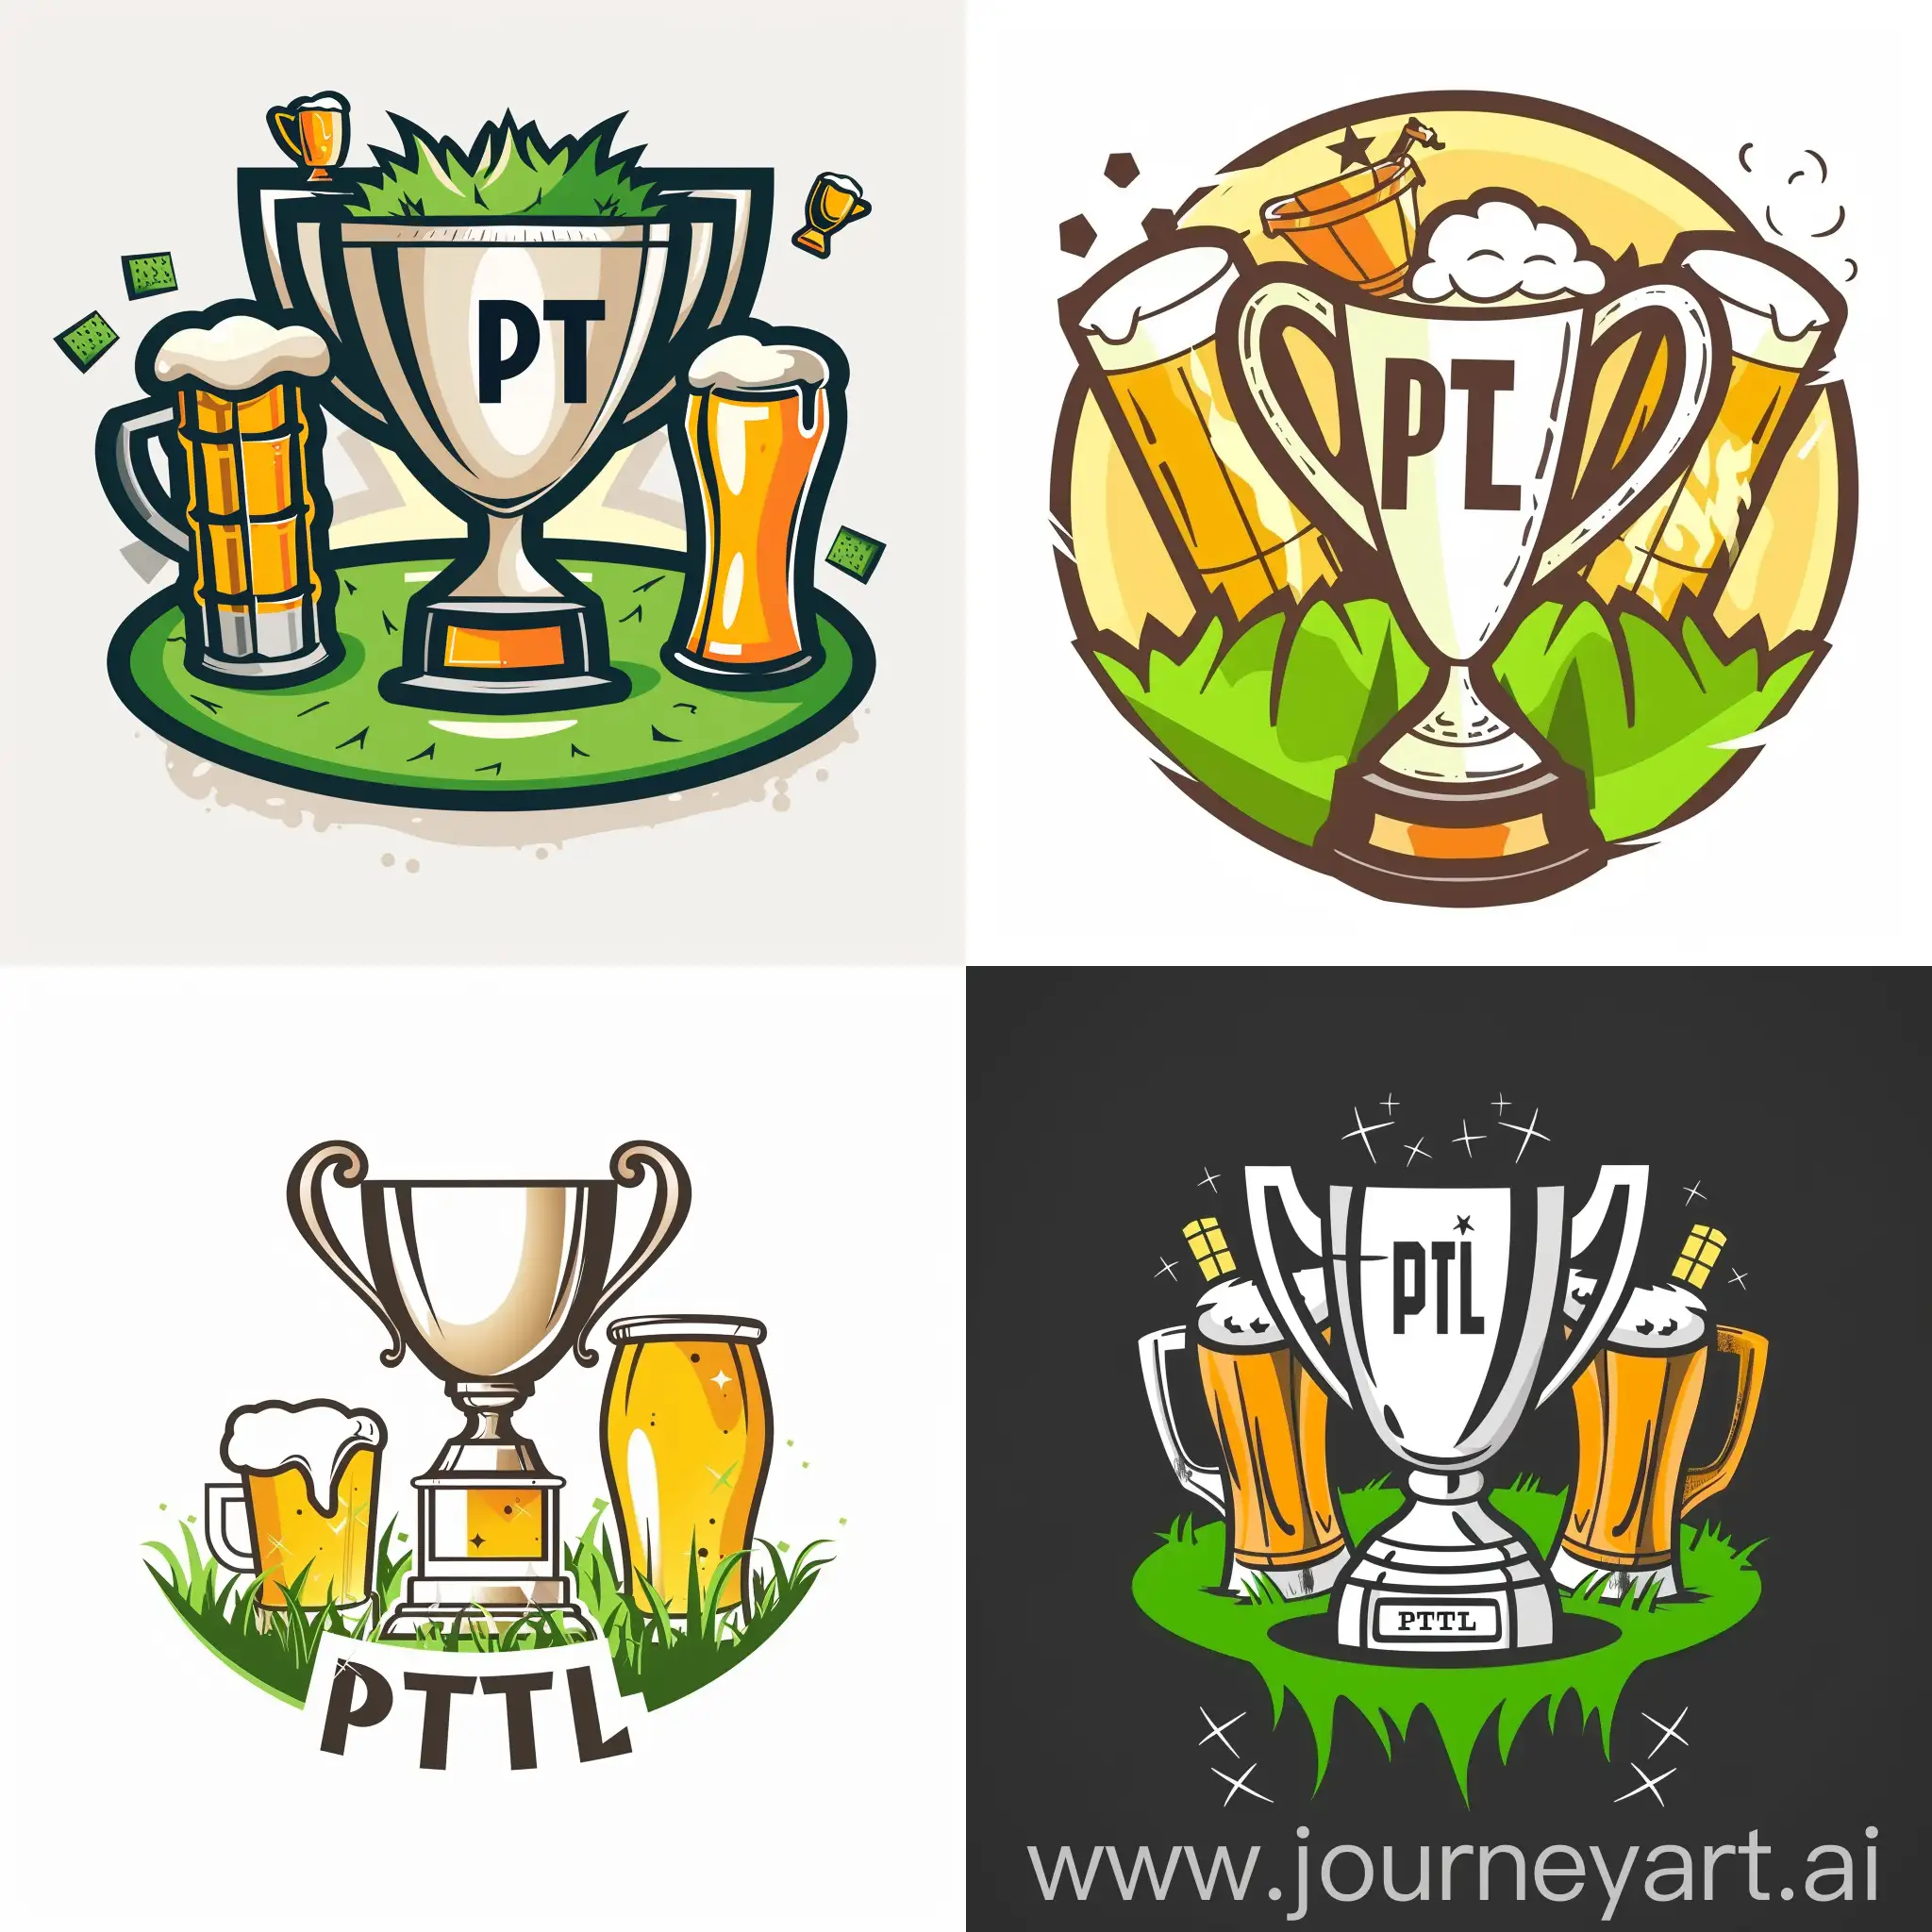 PTL-Soccer-Club-Logo-with-Trophy-Green-Grass-and-Beer